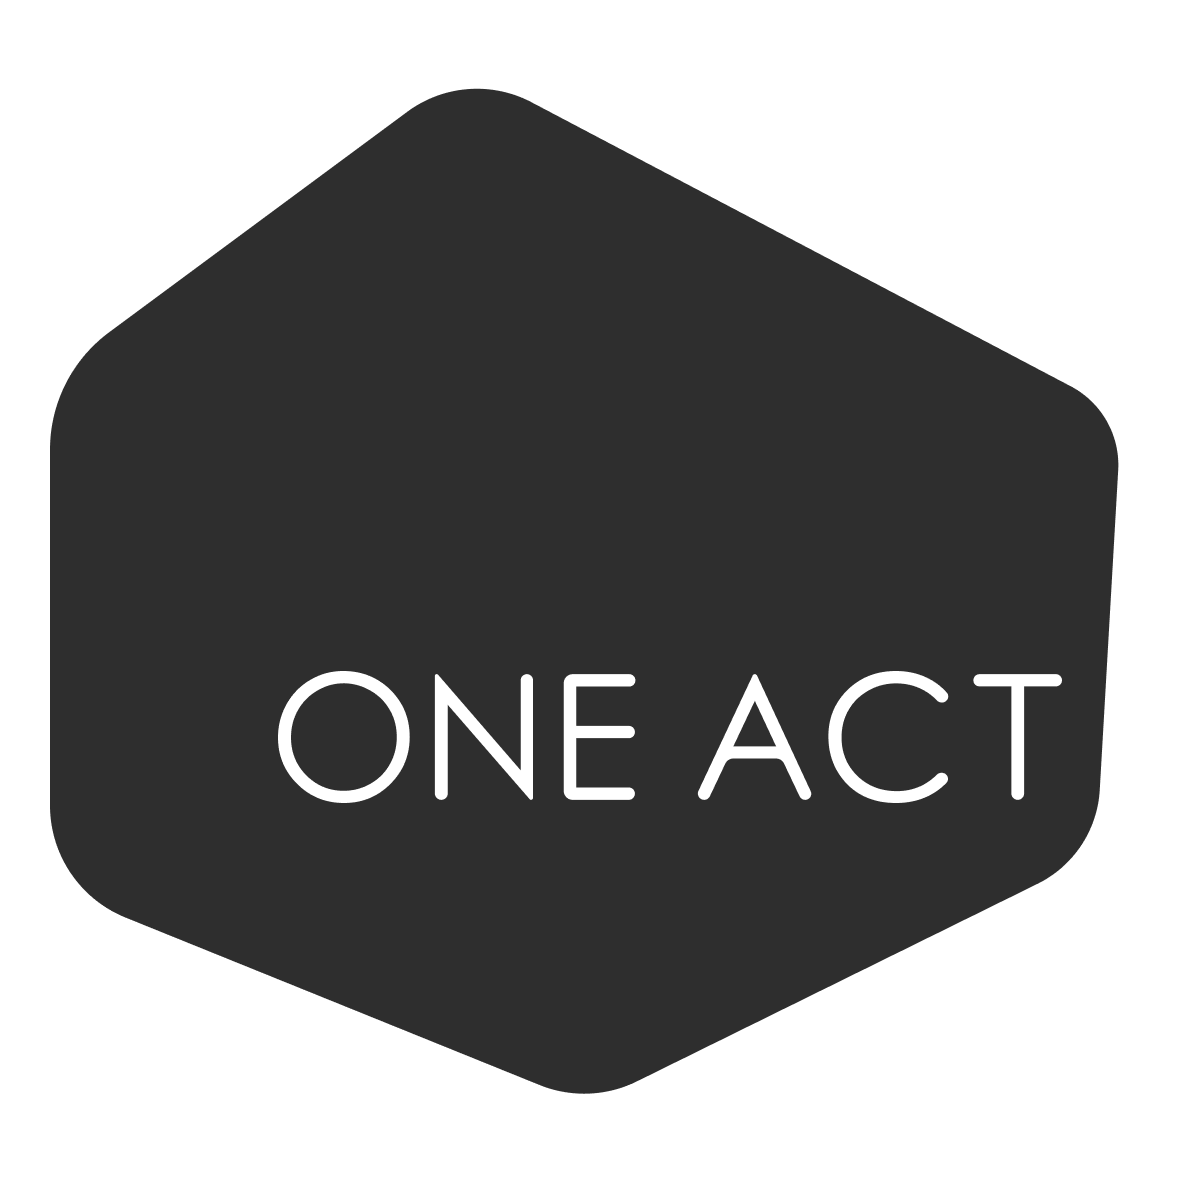 One Act, Inc.